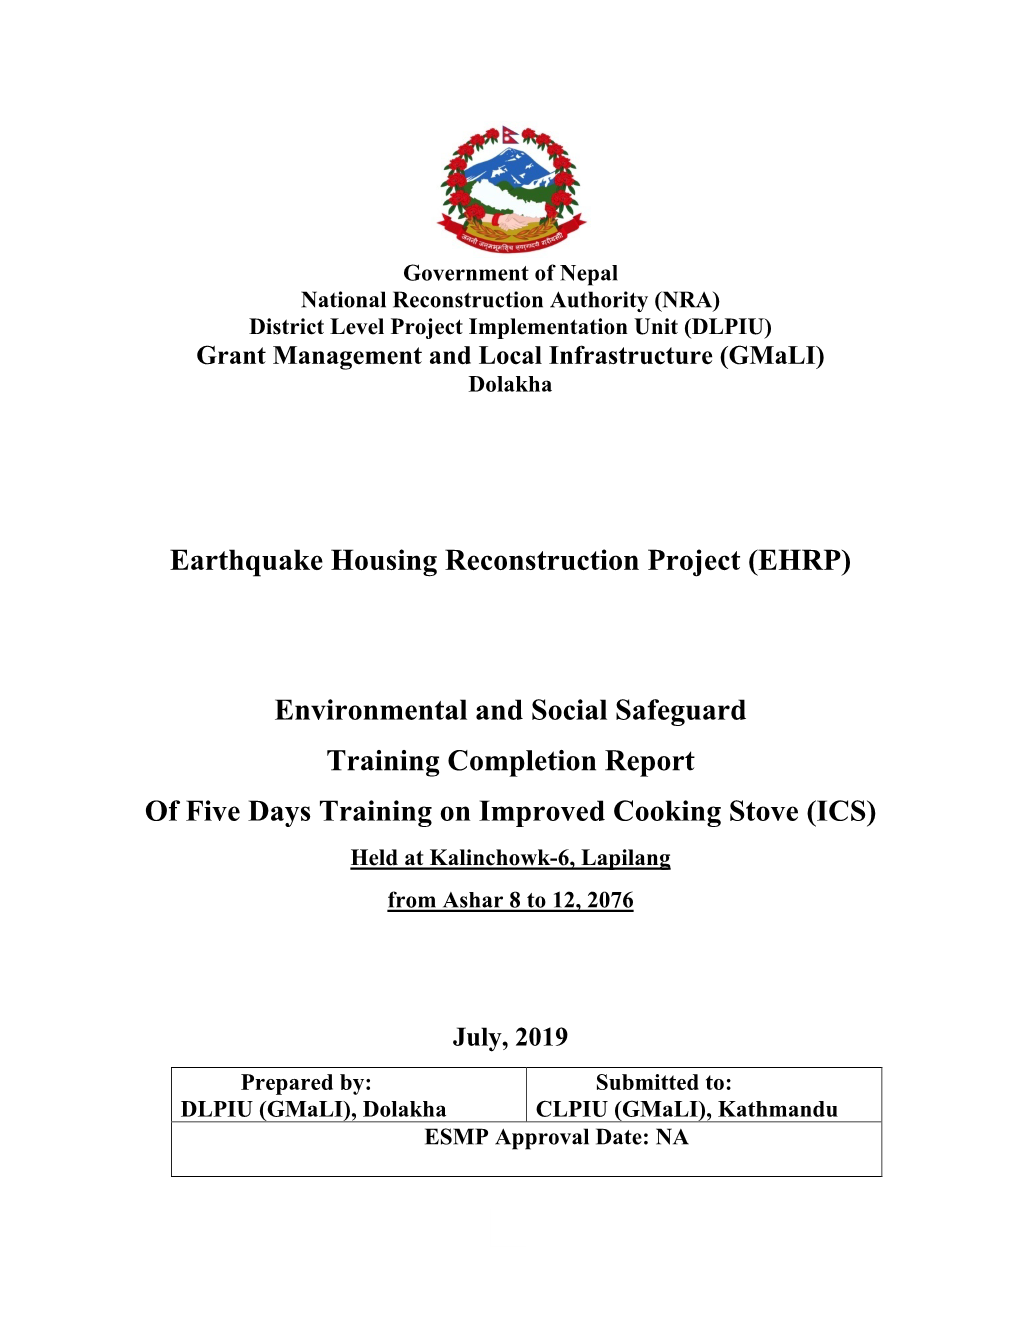 Earthquake Housing Reconstruction Project (EHRP) Environmental And